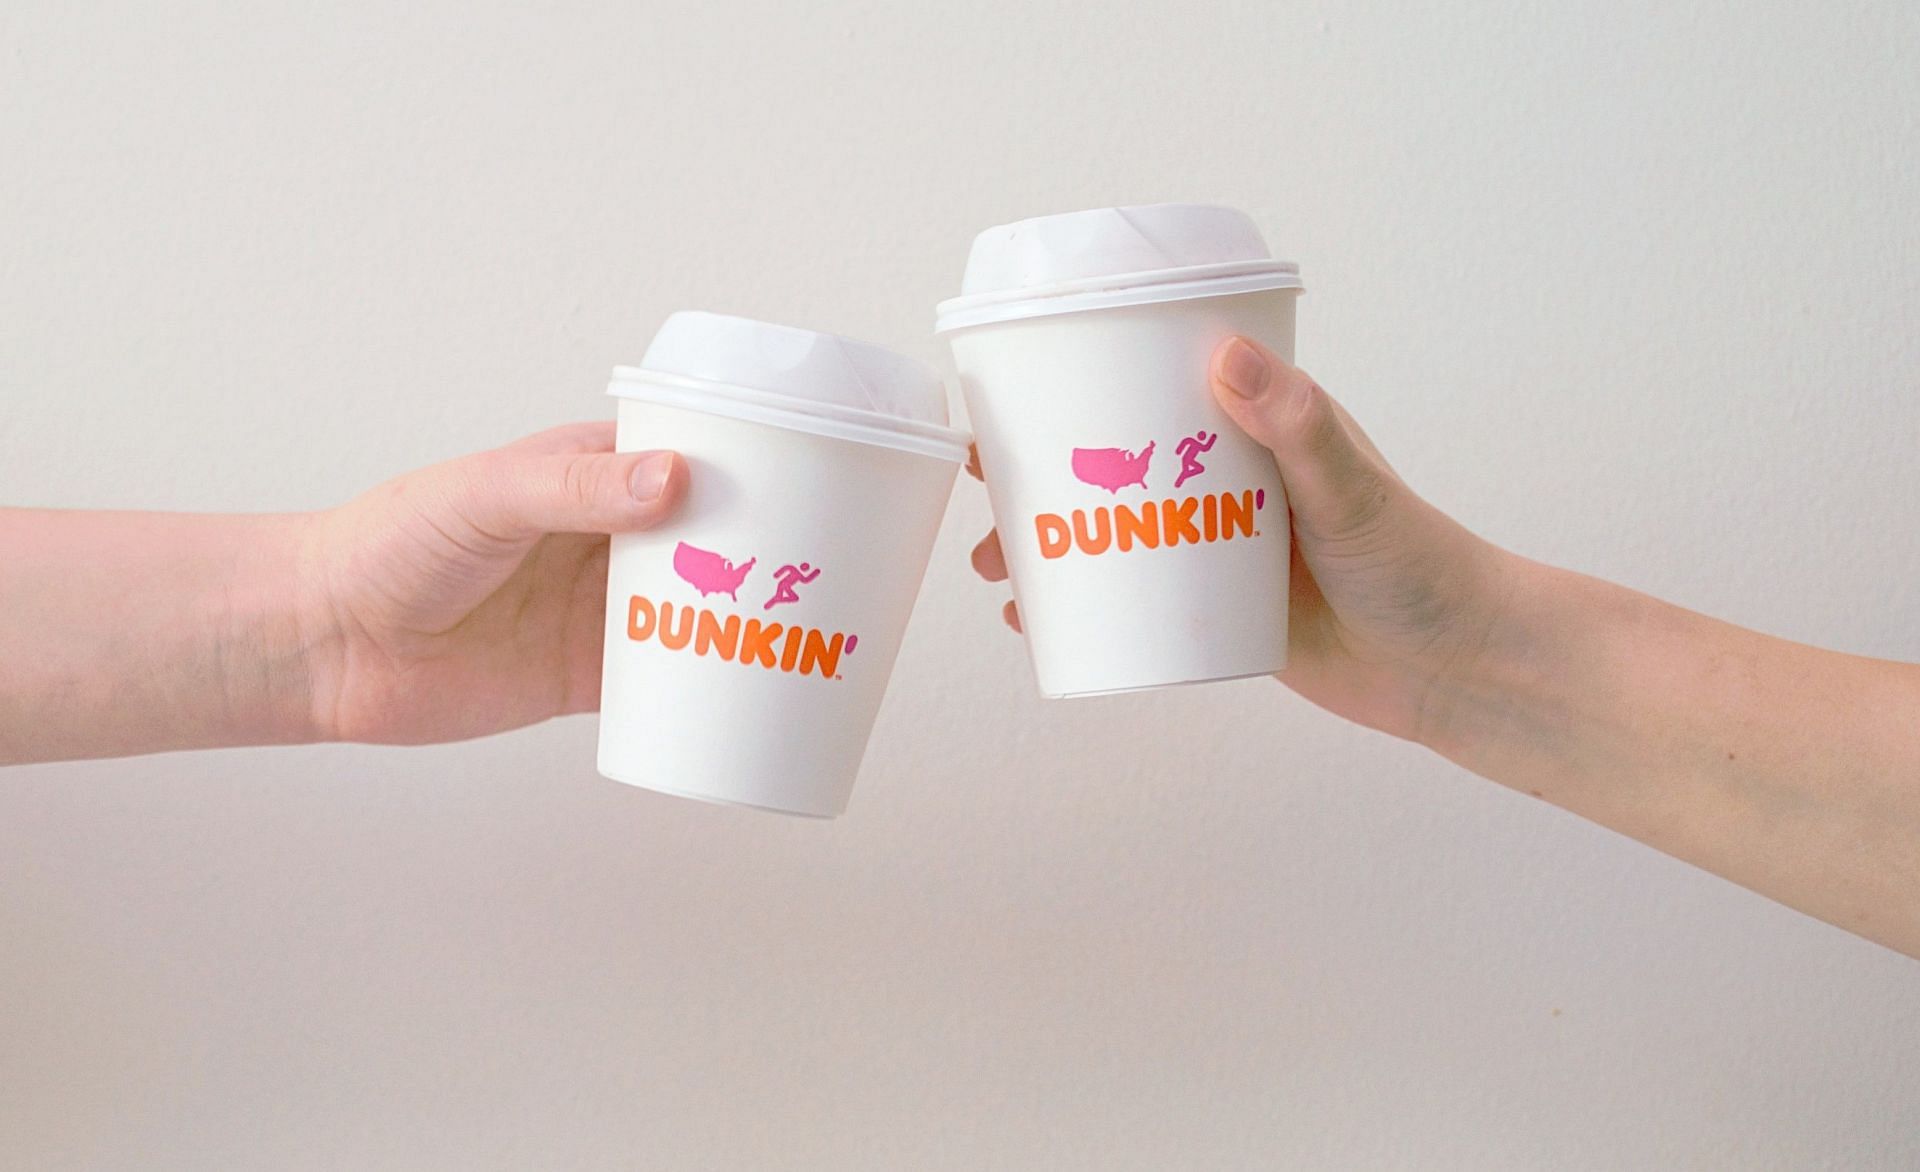 There are various drink options you might want to consider if you&#039;re attempting to make healthier choices at Dunkin Donuts. (Photo by Isabella Fischer on Unsplash)